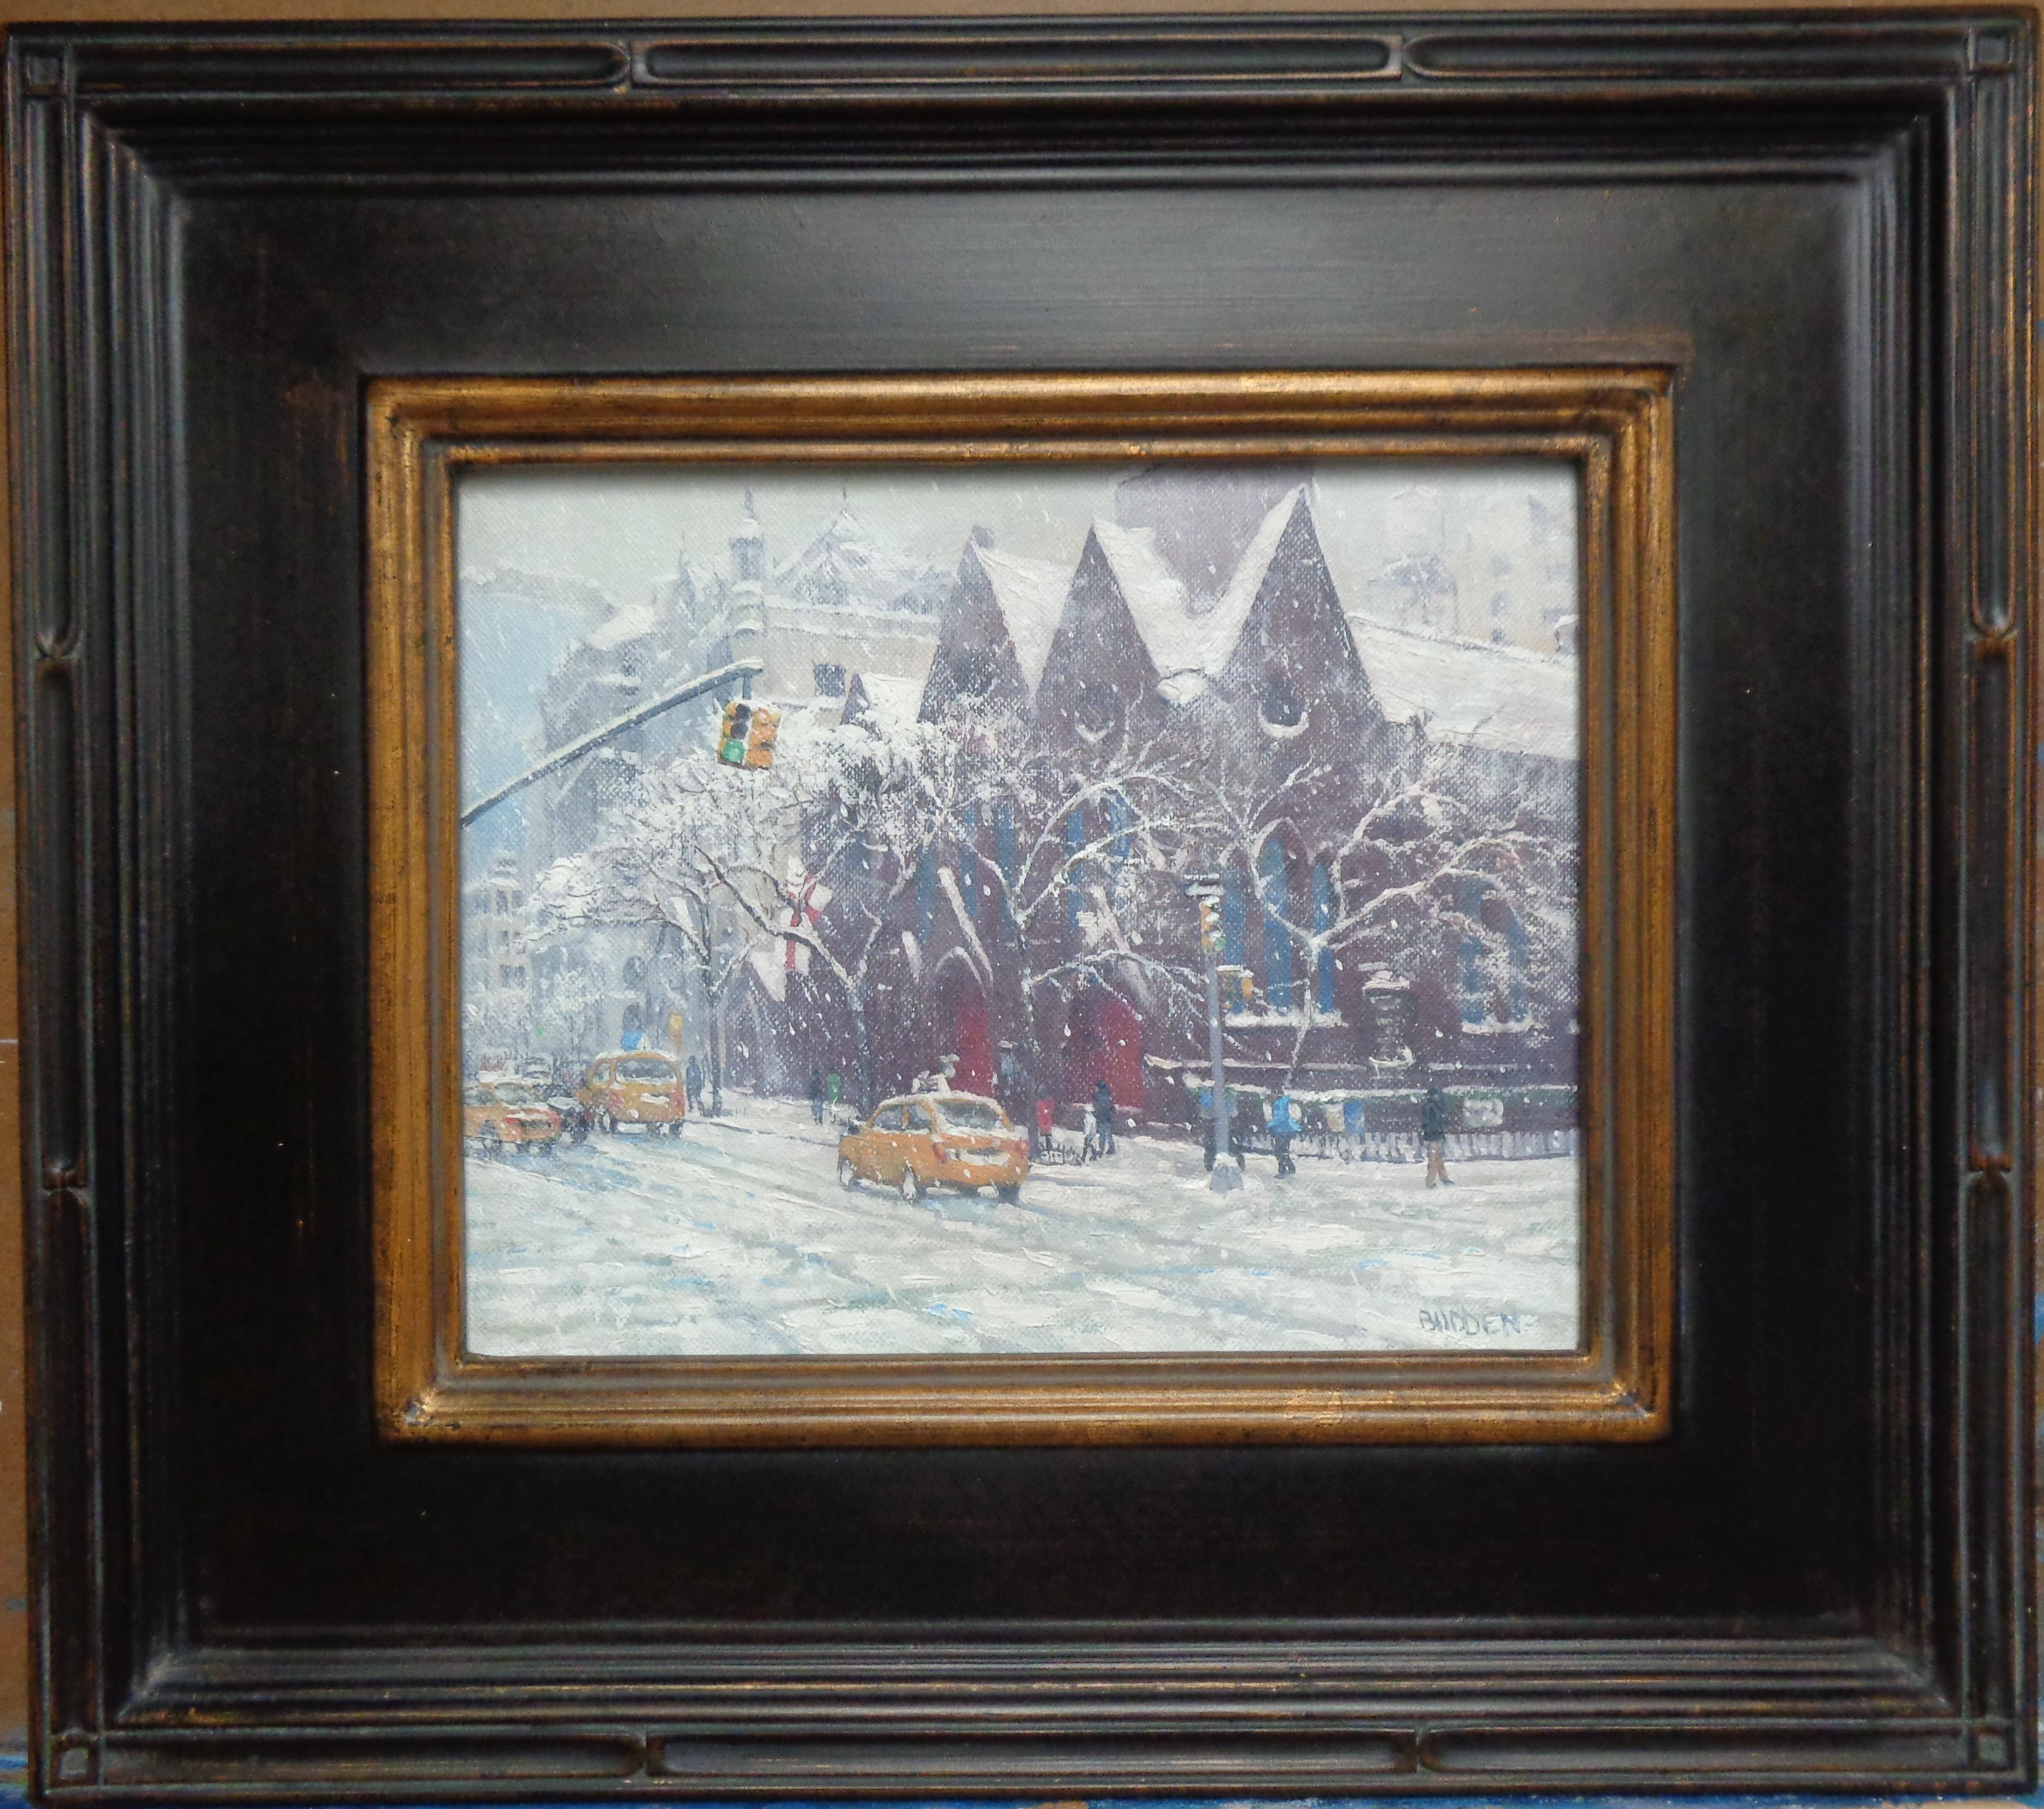 Winter Calvary Church is an oil painting on canvas panel by award winning contemporary artist Michael Budden. It is a busy winter street scene on Park Ave in NYC near Gramercy Park. I was visiting the park and came across this church scene as I was